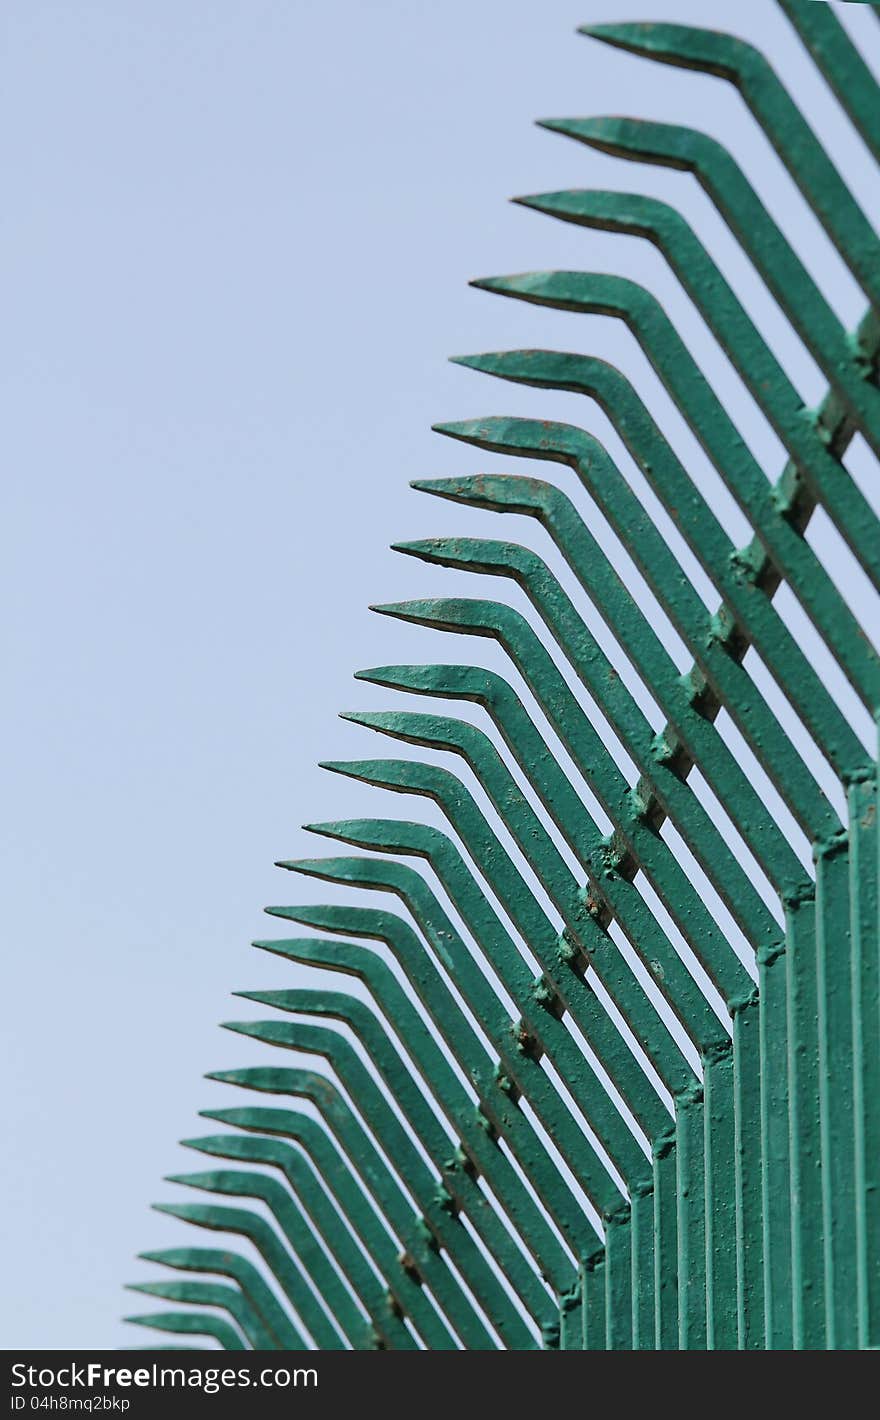 Rows of pointed sharp wrought iron bars forged to form a fence in green color and sky in the background. Rows of pointed sharp wrought iron bars forged to form a fence in green color and sky in the background